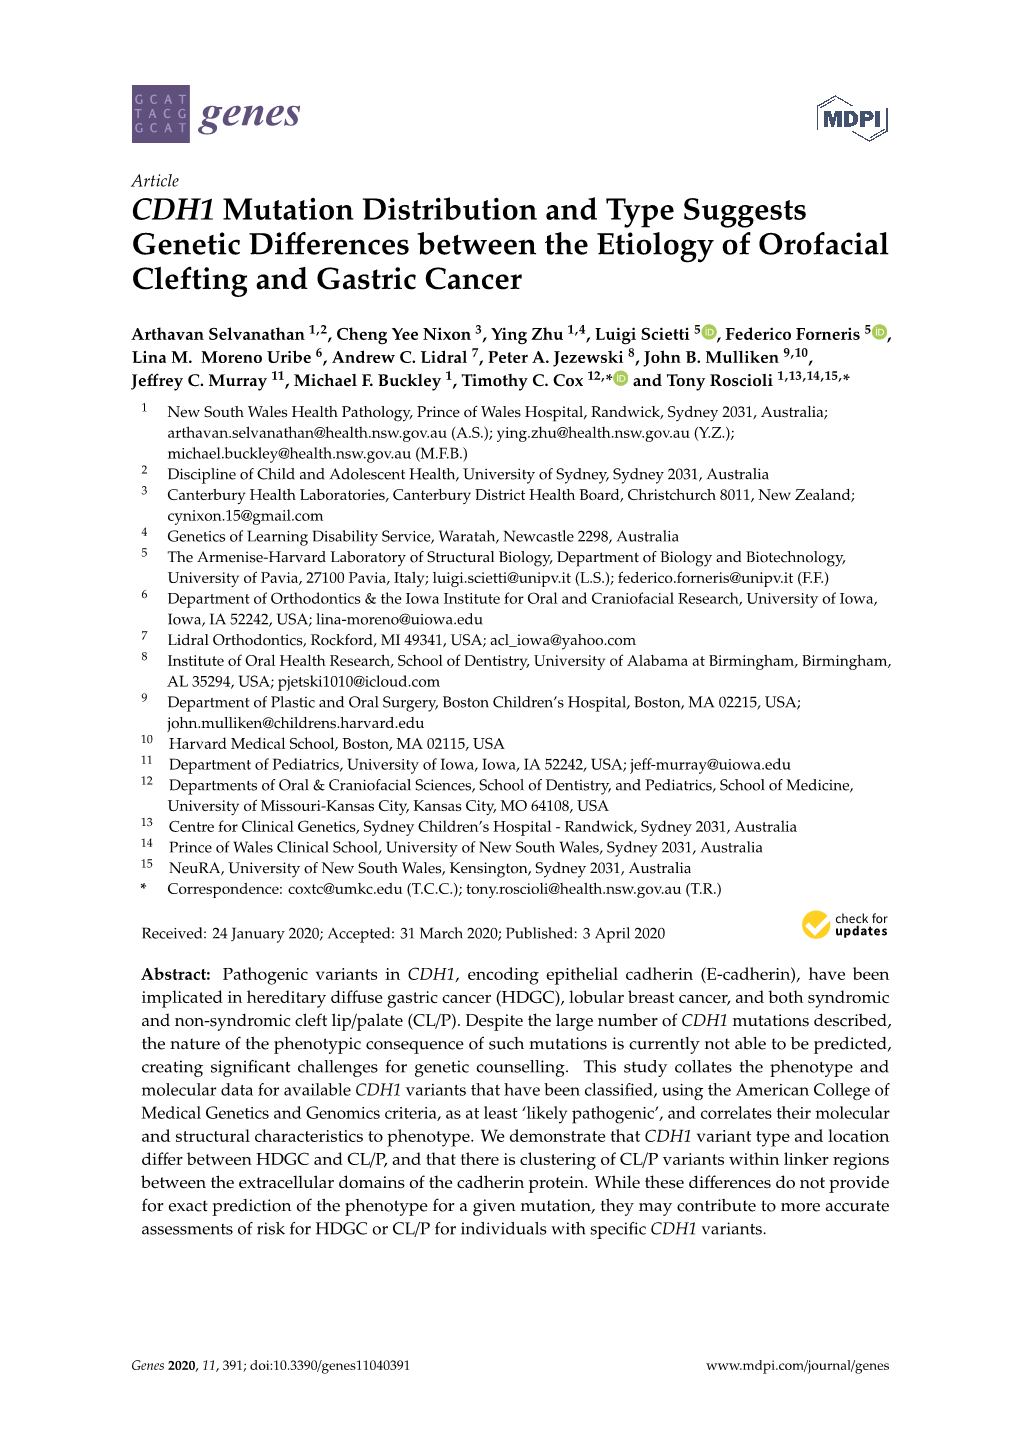 CDH1 Mutation Distribution and Type Suggests Genetic Differences Between the Etiology of Orofacial Clefting and Gastric Cancer